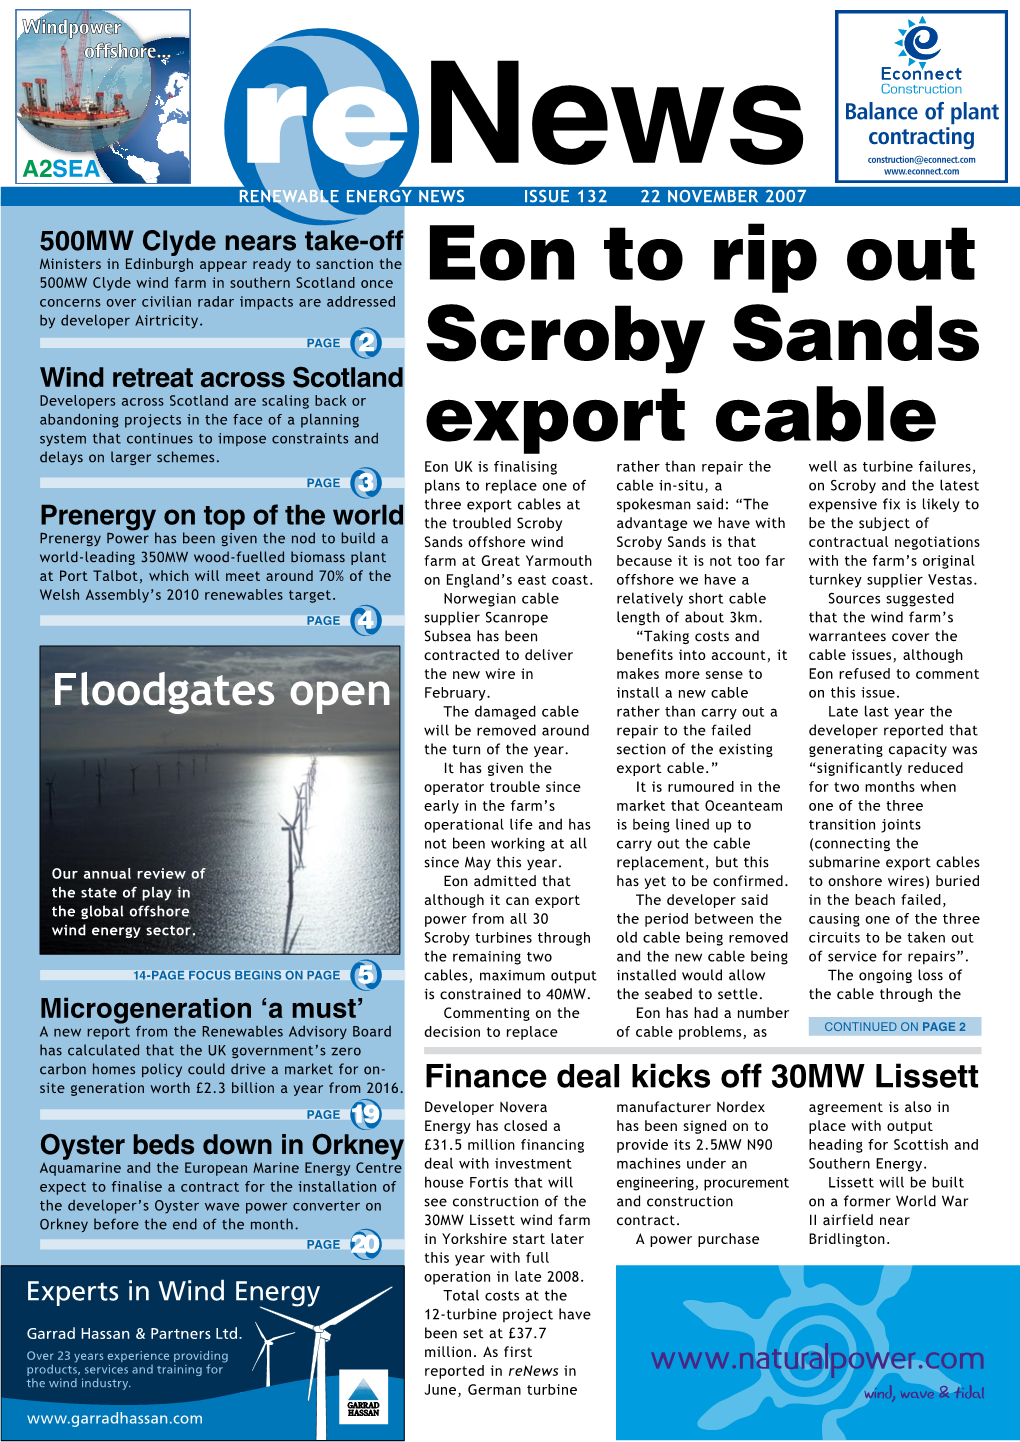 Eon to Rip out Scroby Sands Export Cable